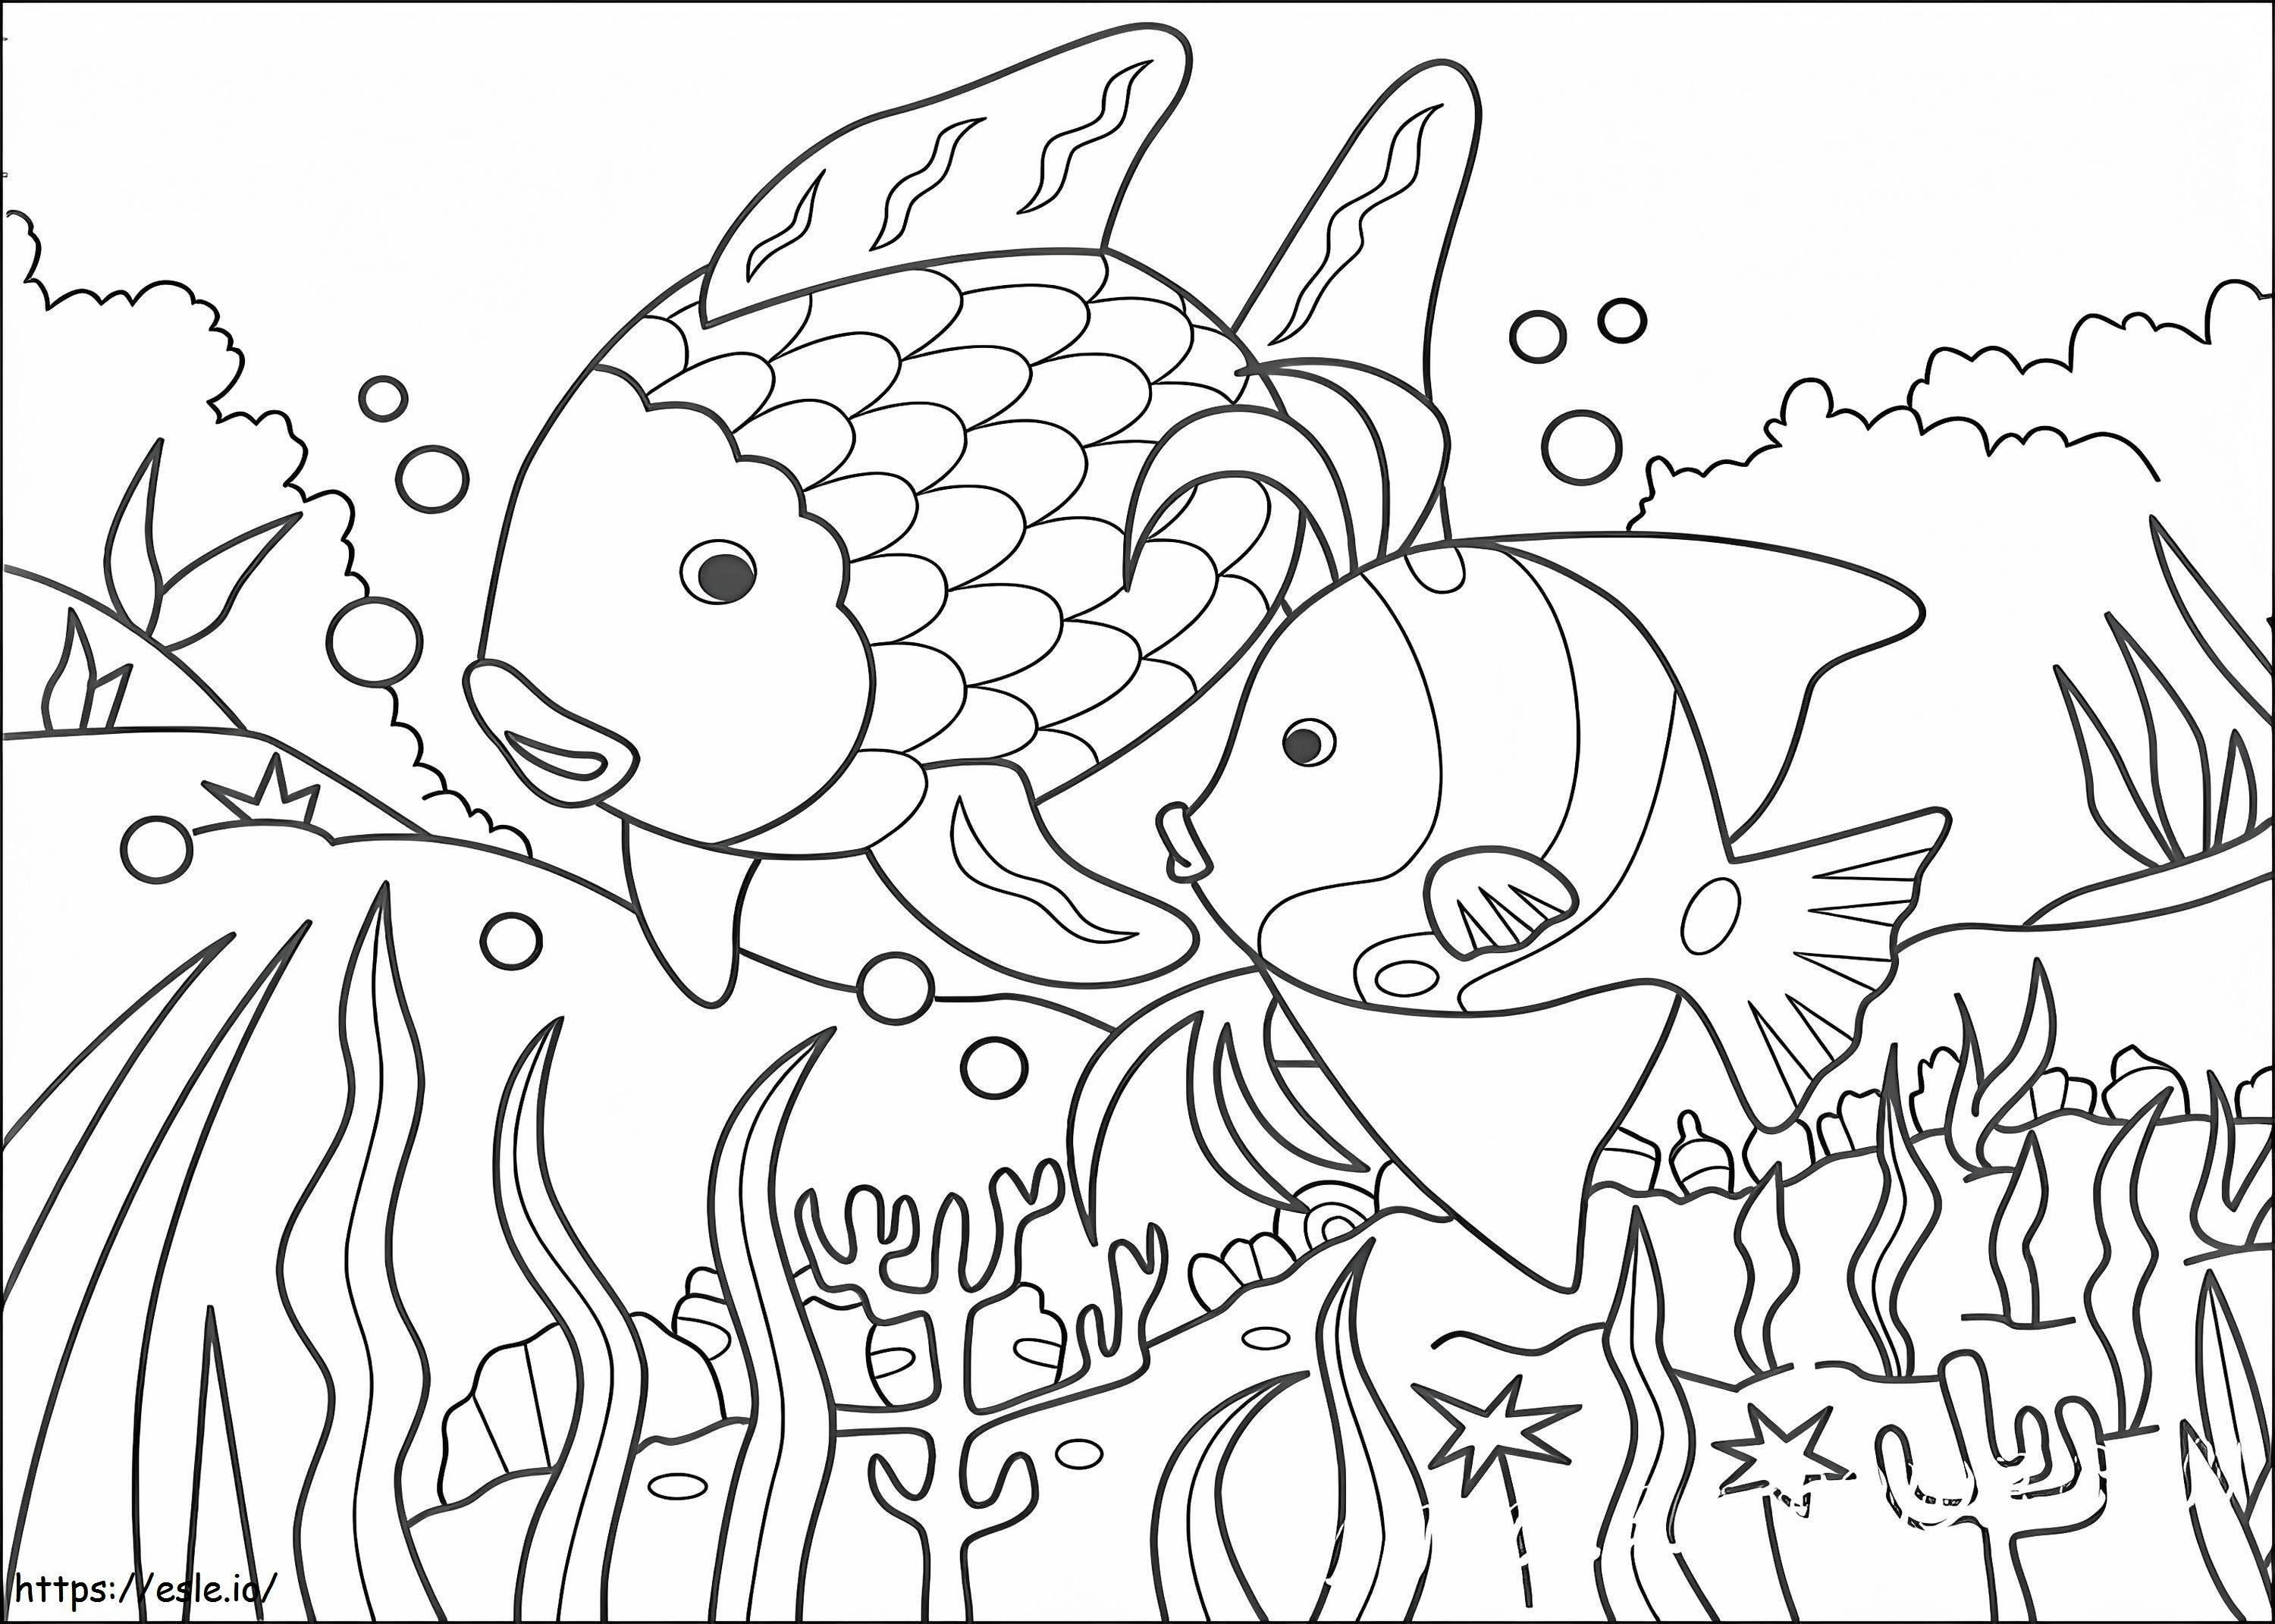 Two Rainbow Fish In The Sea coloring page